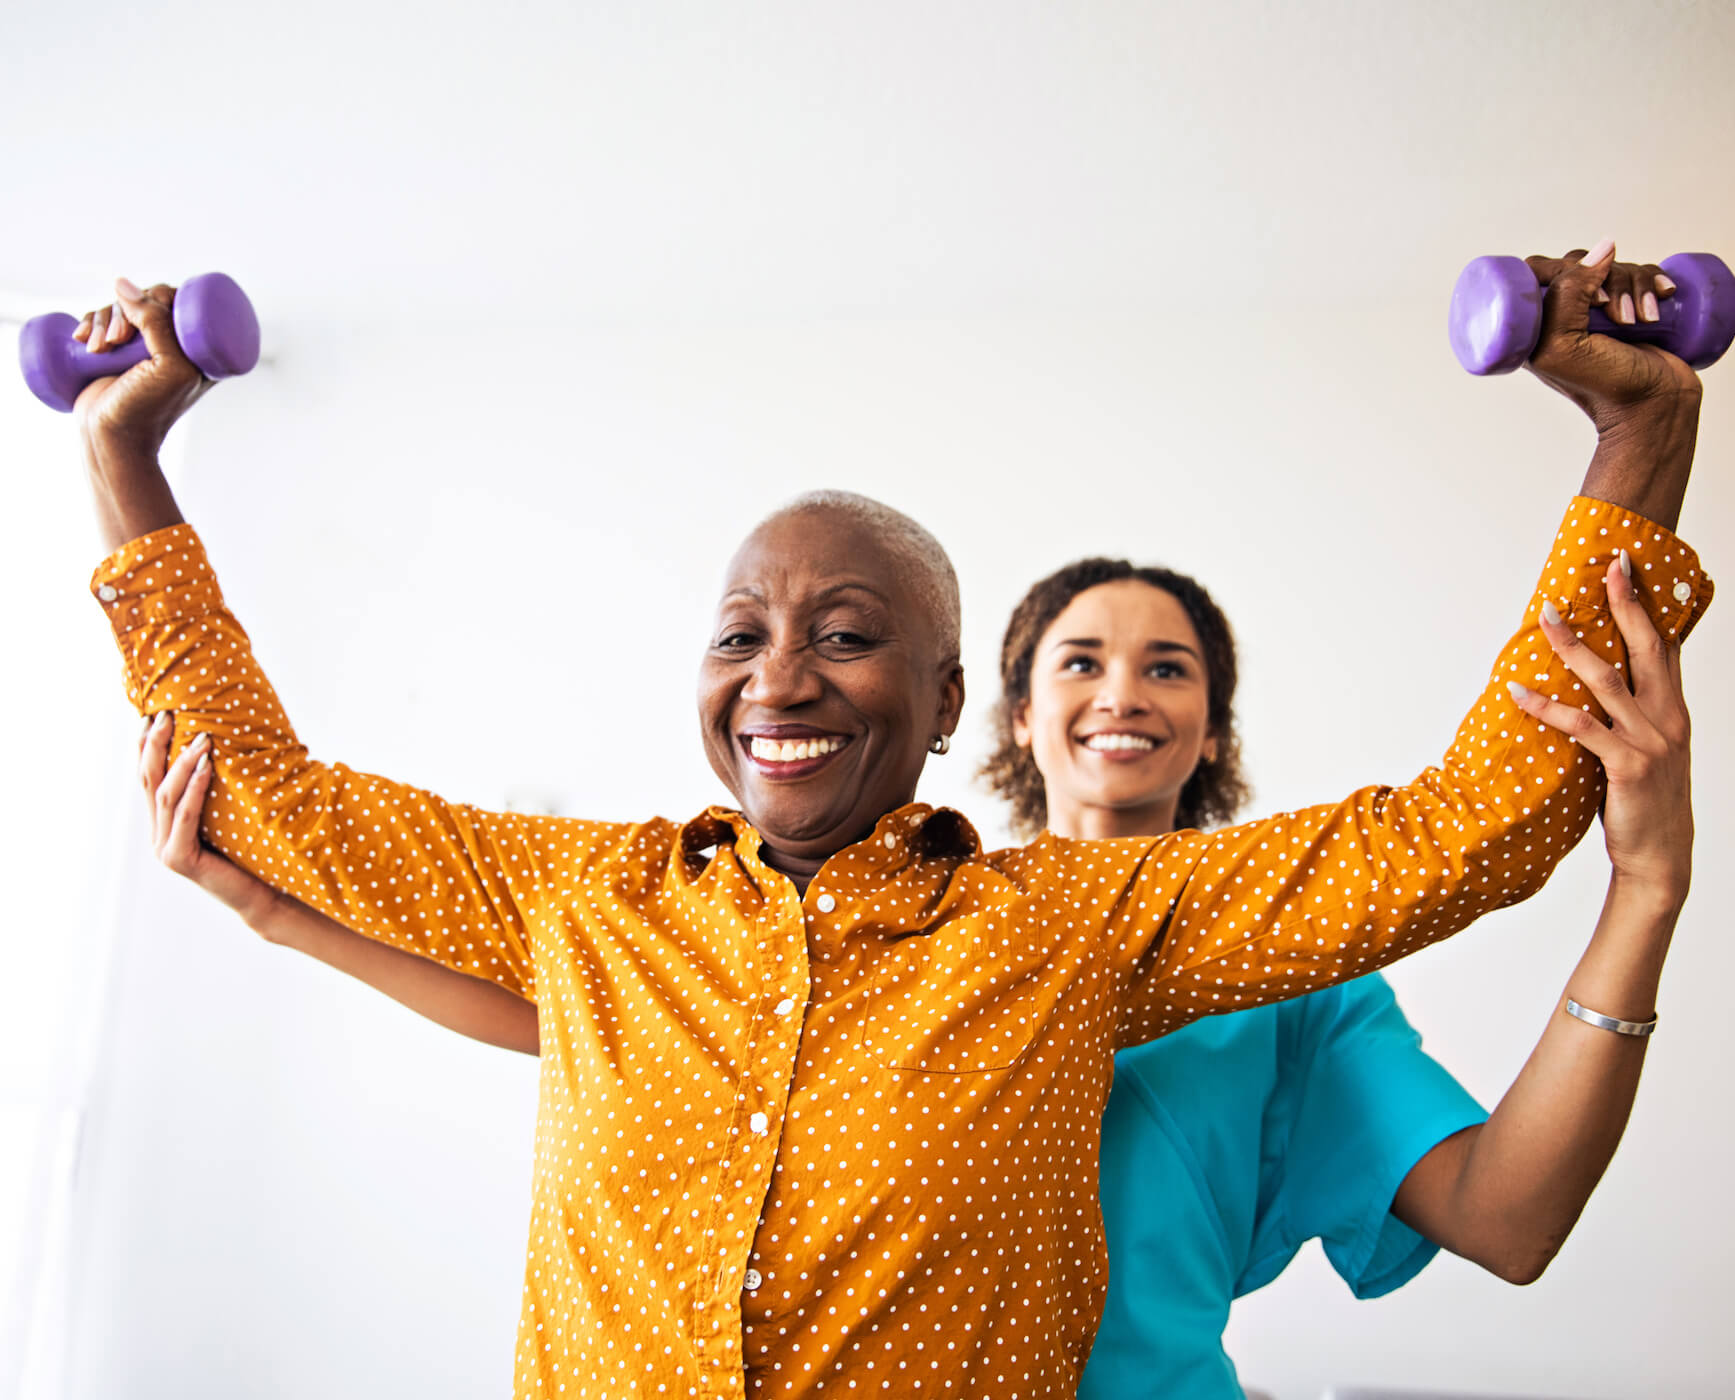 Female medical professional helping senior woman lift light weights